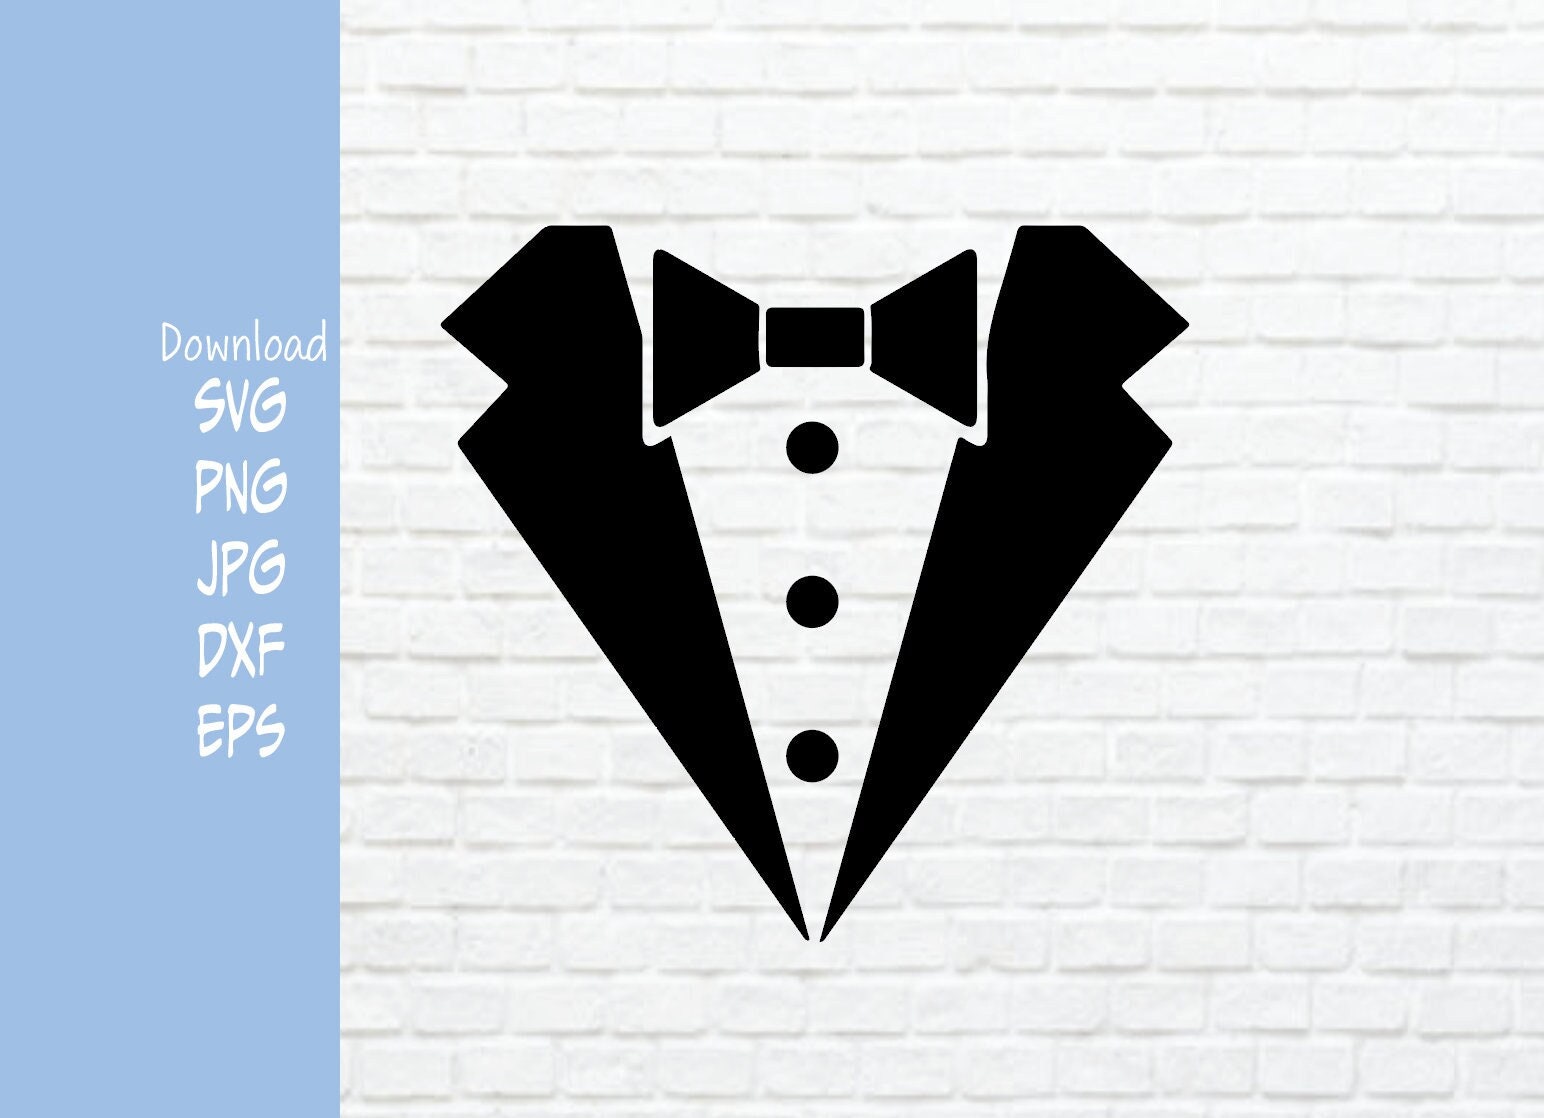 Tuxedo SVG Image for Use Suit Tie Outfit Wedding Groom | Etsy